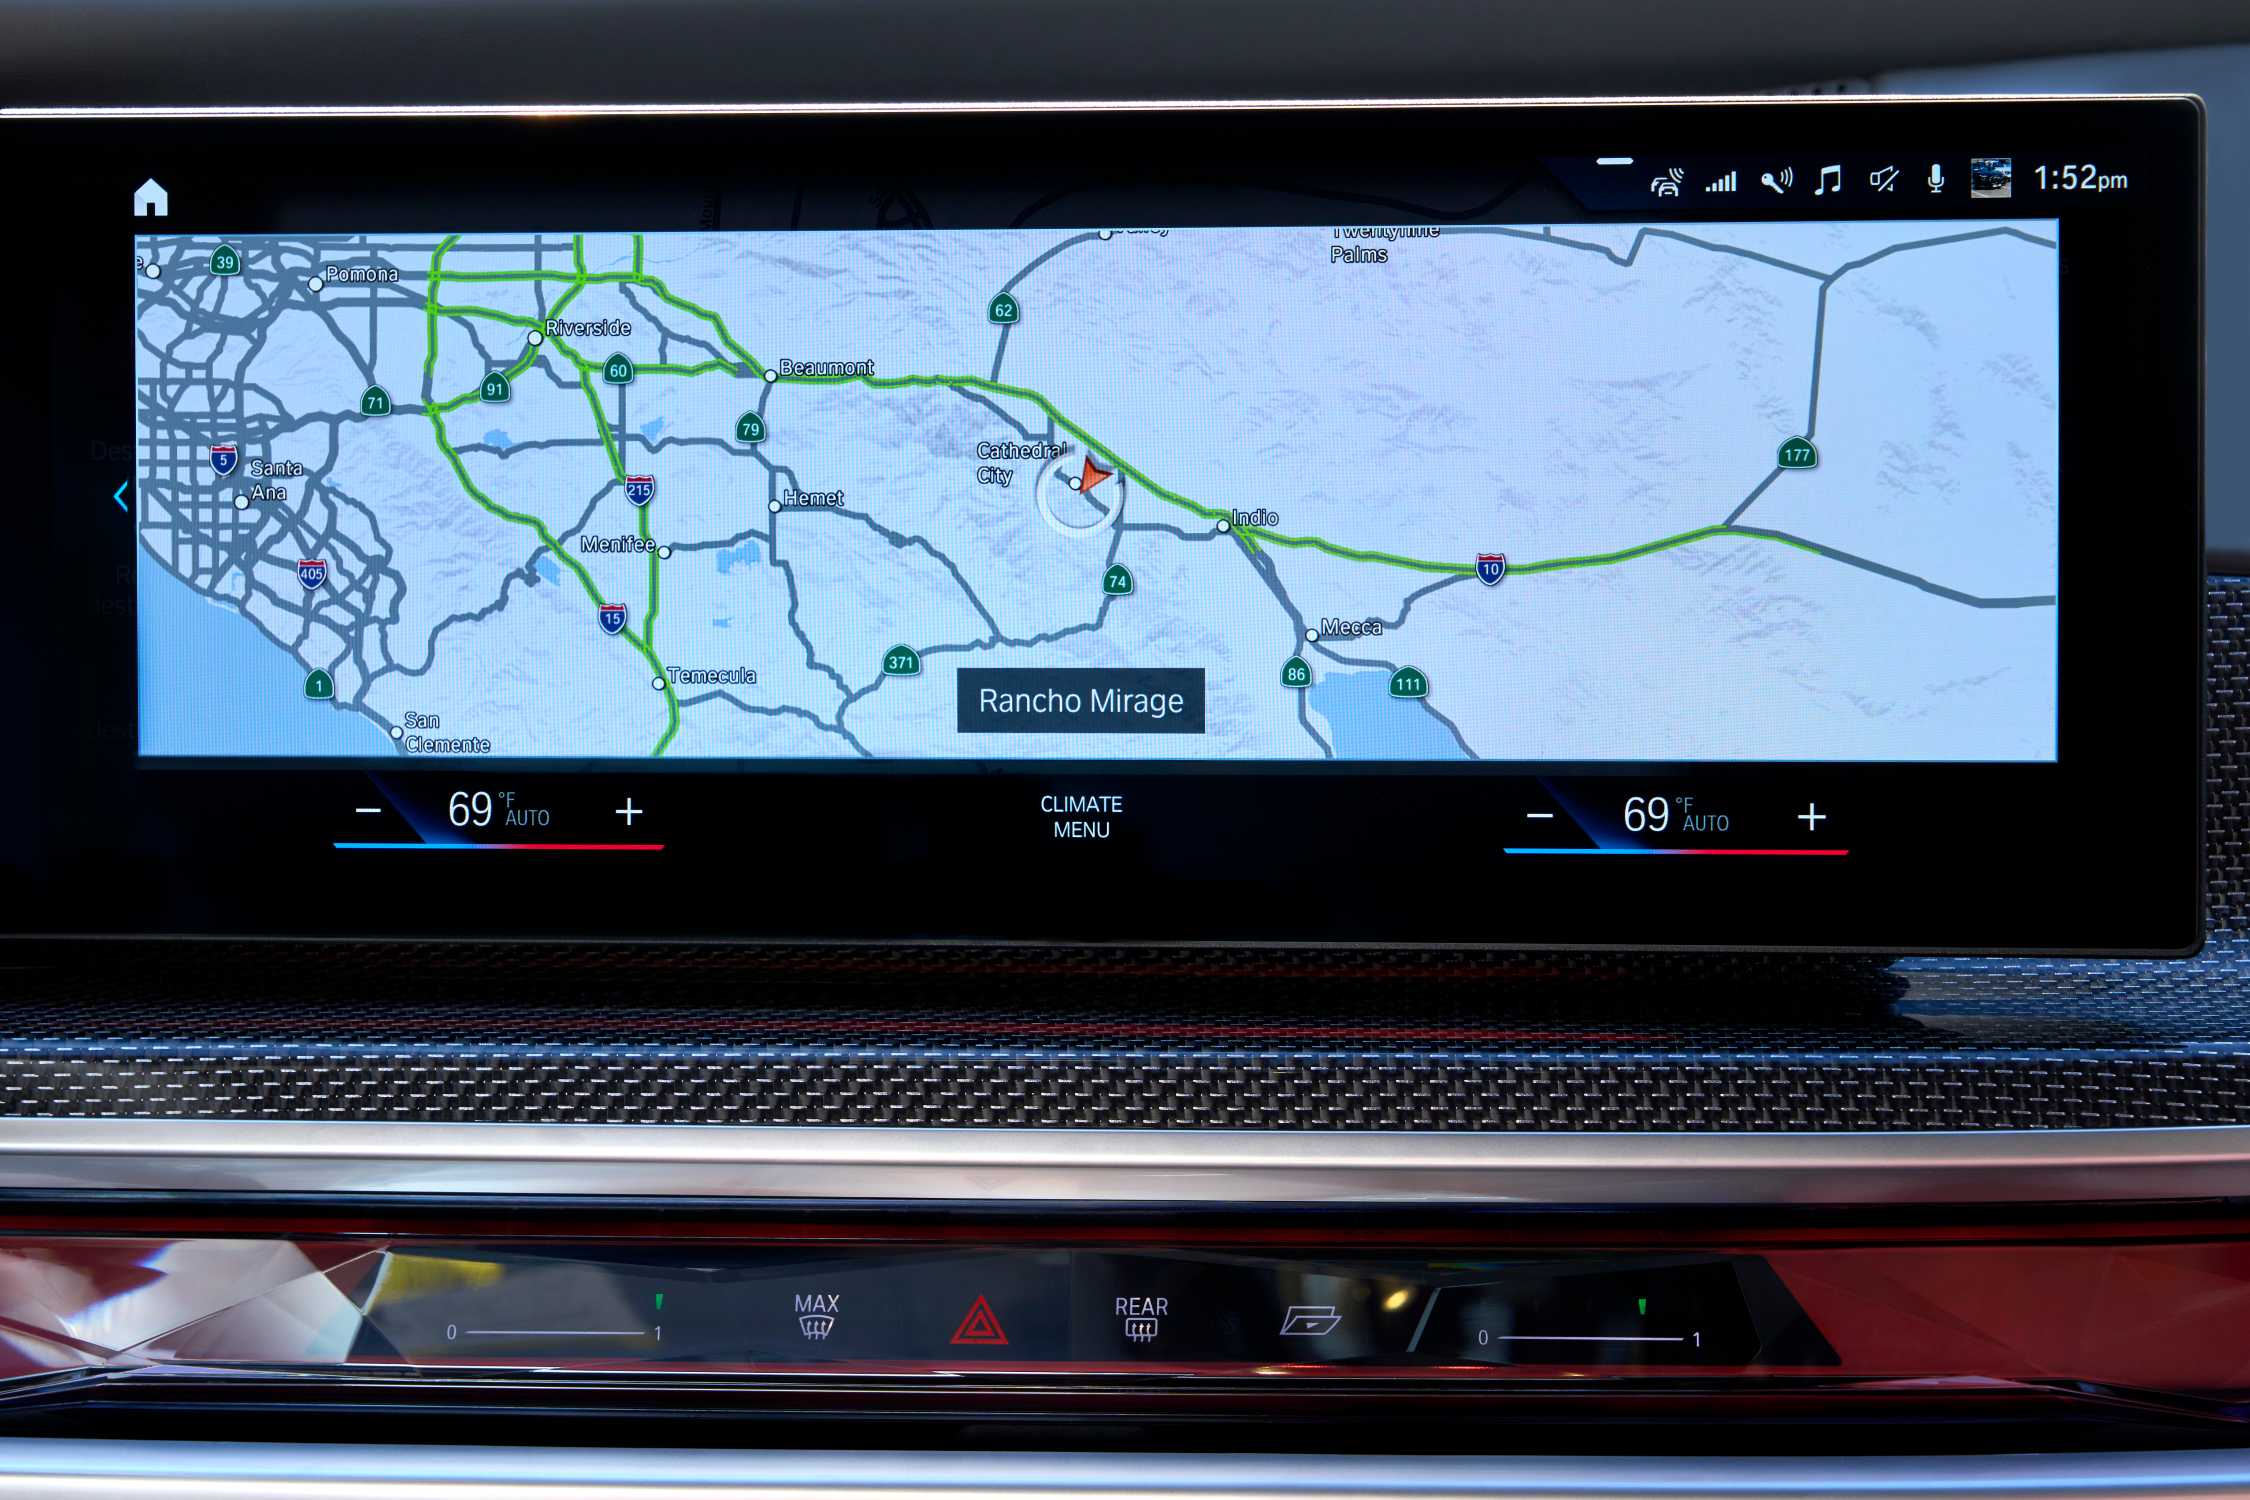 HERE HD Live Map Powers hands-free driving and routing functionalities in the new BMW 7 Series.